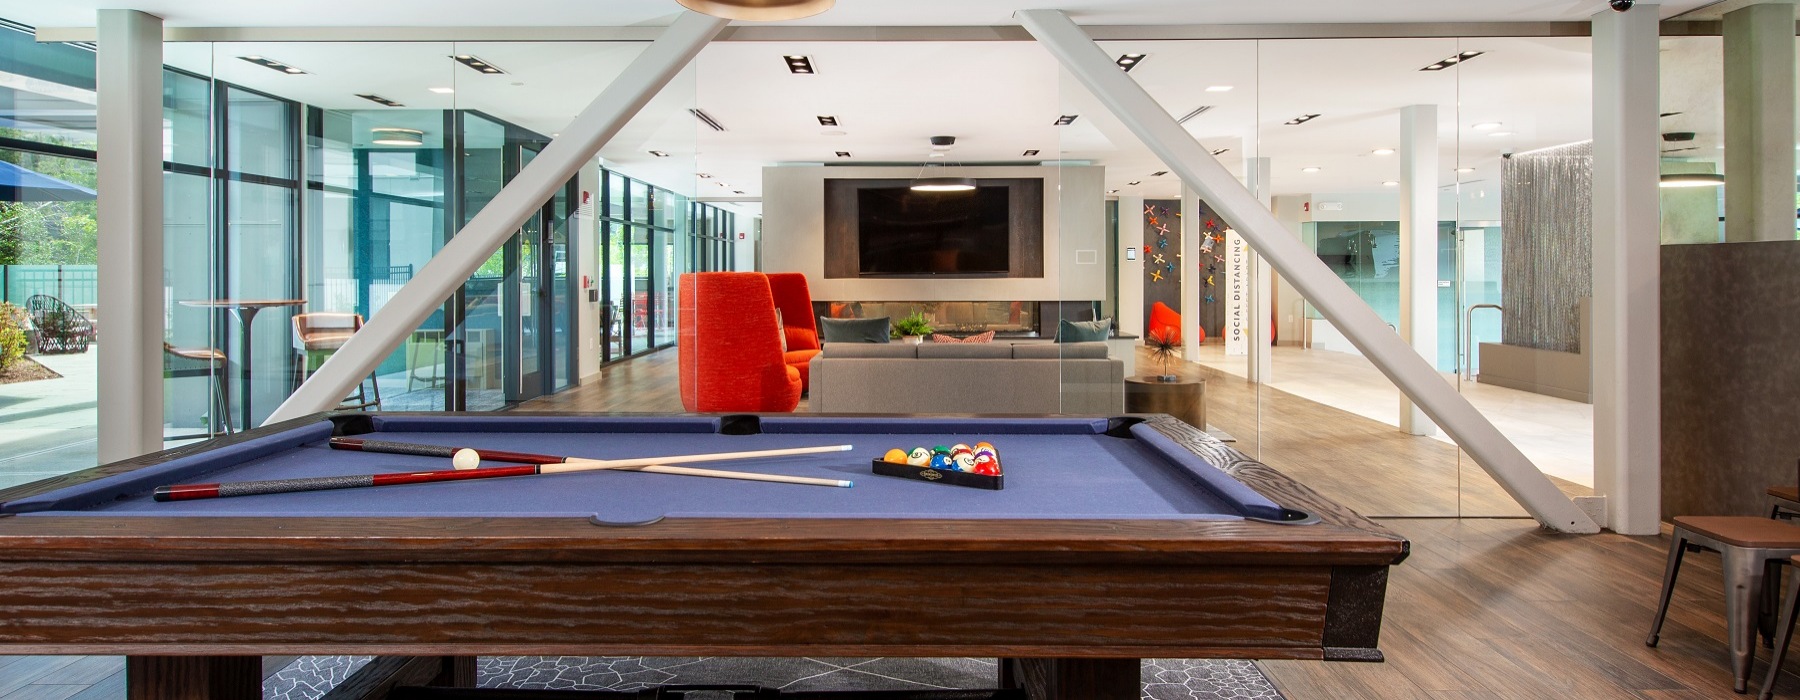 game room with pool table, lighting, flat screen TV and seating. View to outdoor seating area. 